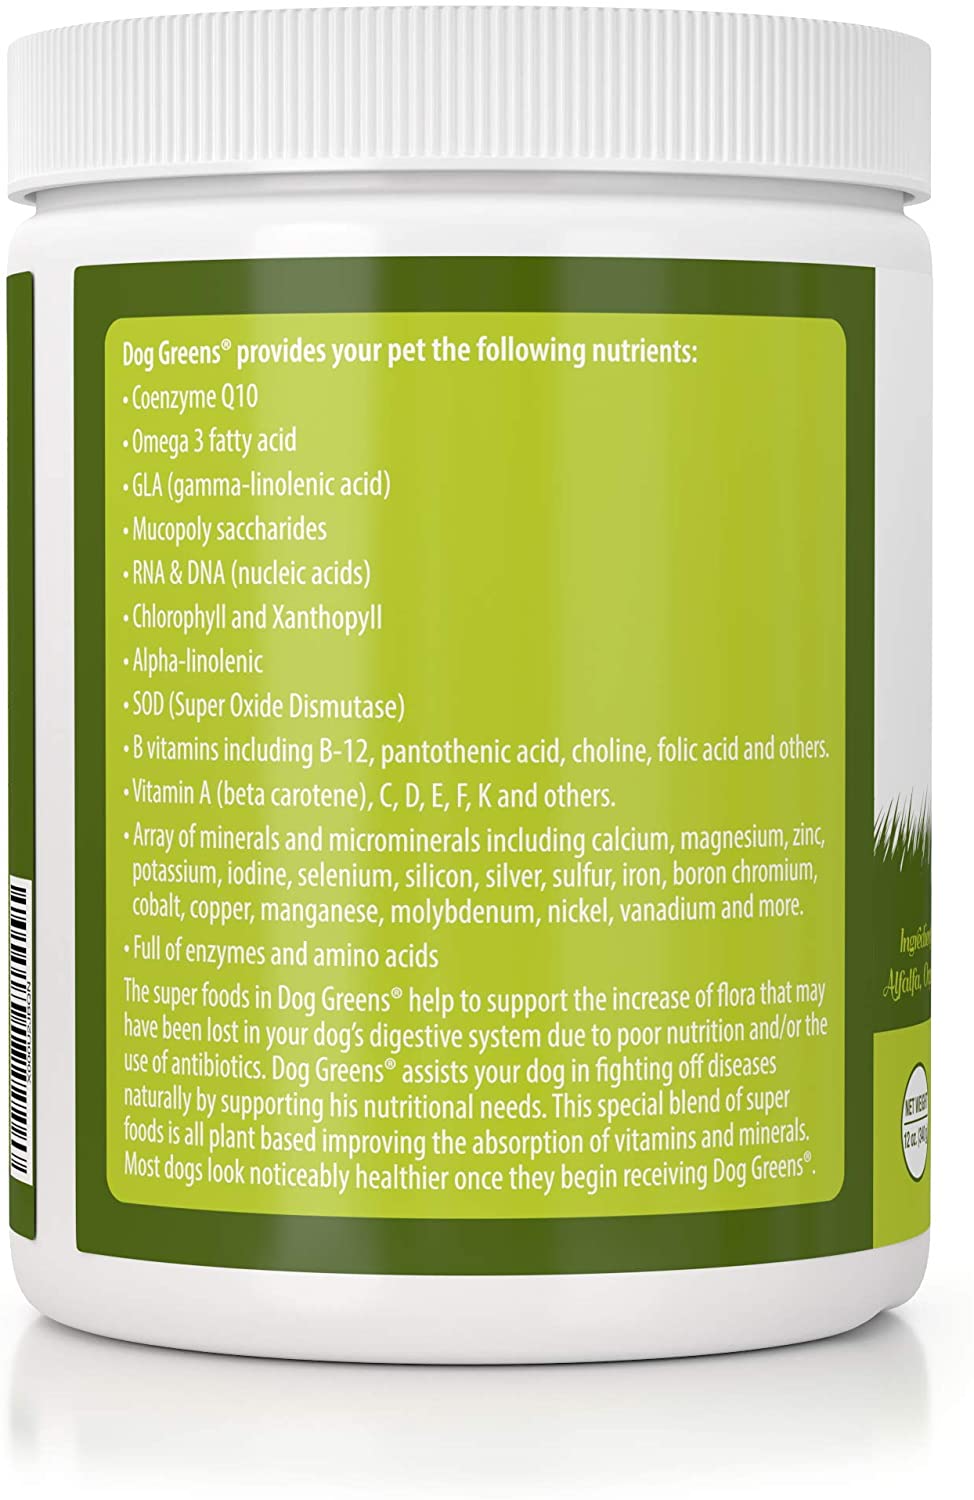 Dog Greens- Organic and Wild Harvested Vitamin and Mineral Supplement for Dogs